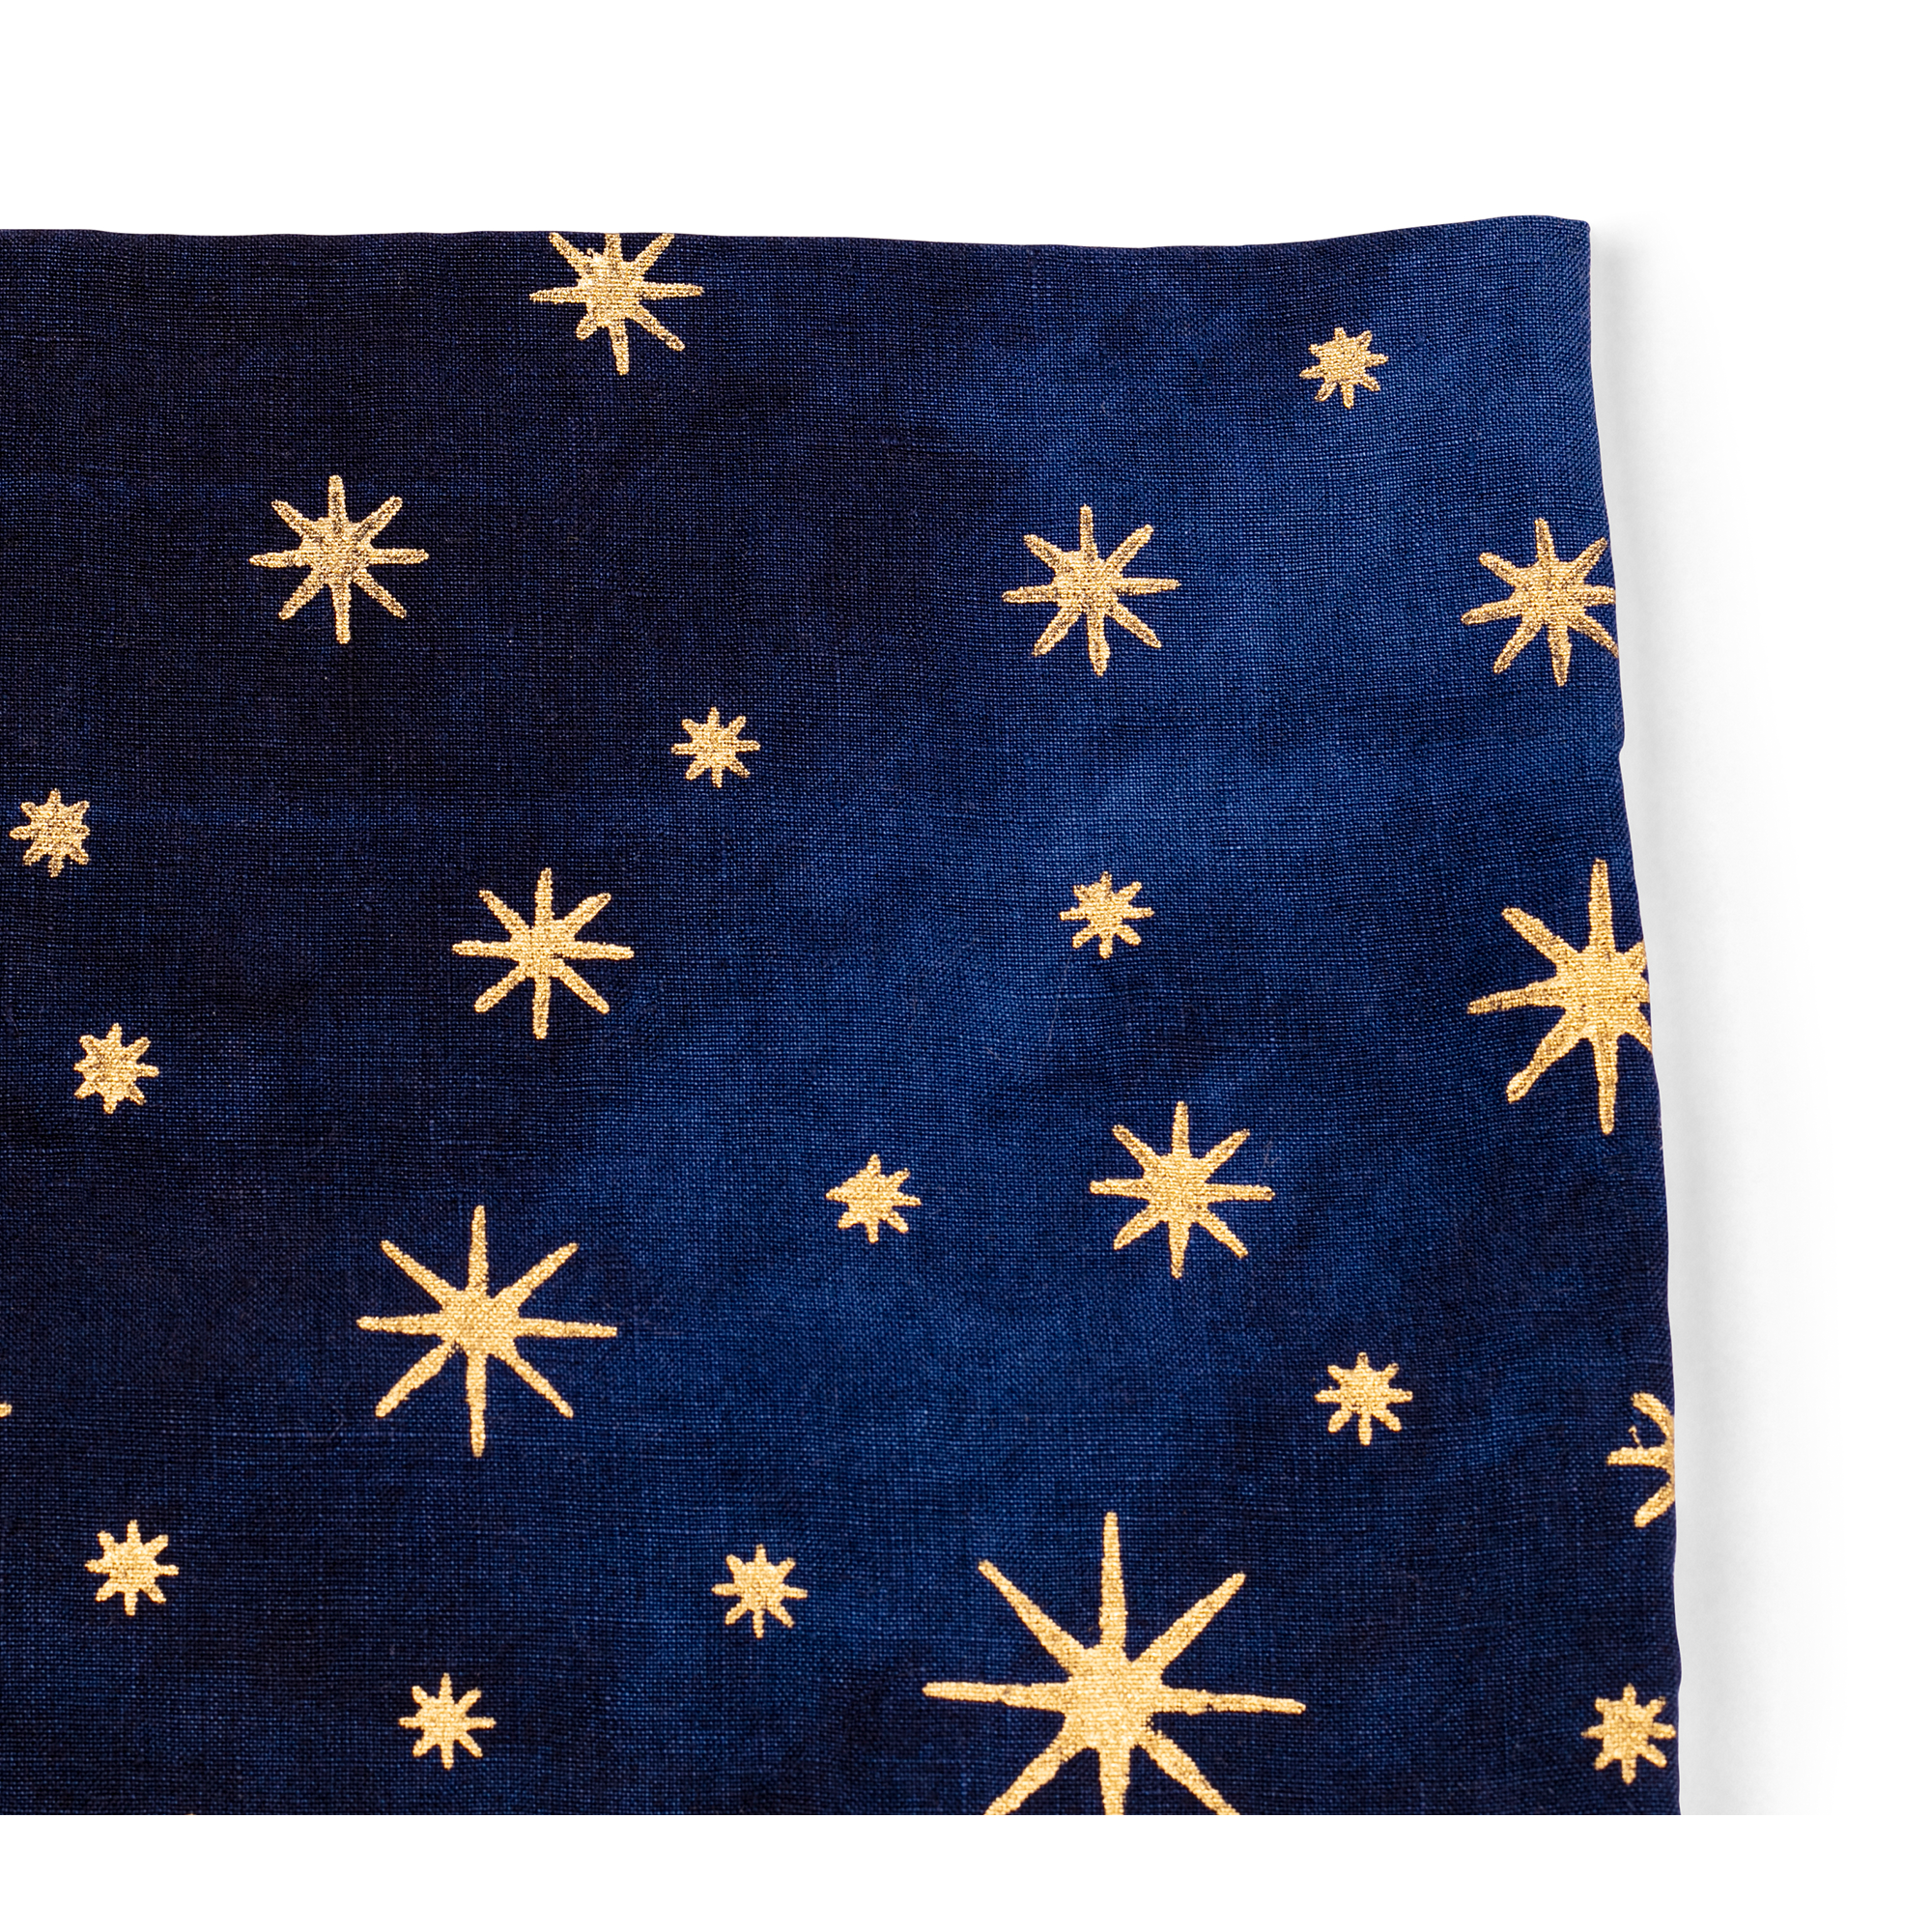 A luxurious indigo linen tea towel with golden stars, perfect for adding a touch of elegance to your table and kitchen.